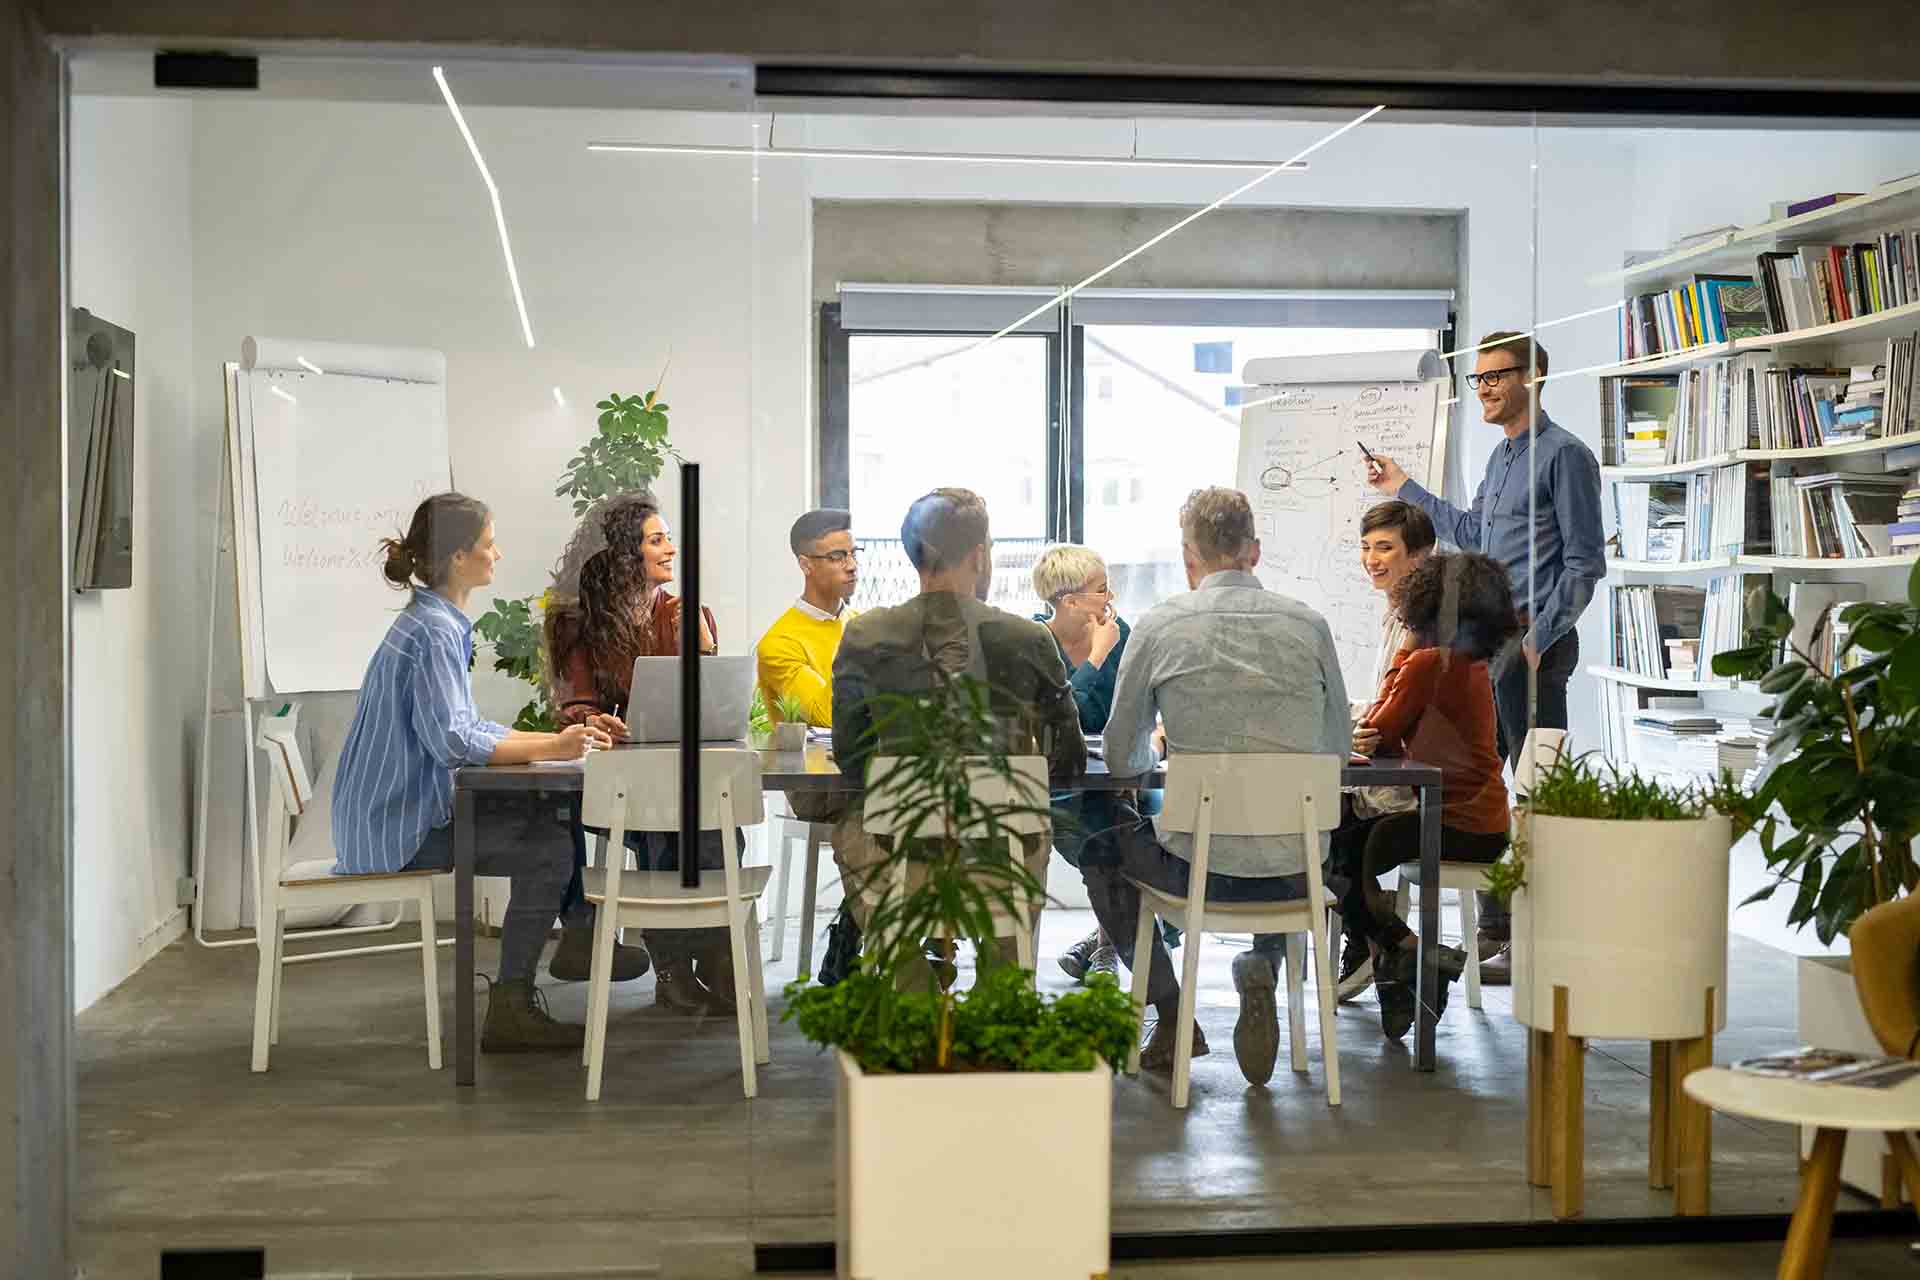 Man leading a group meeting in a glass conference room